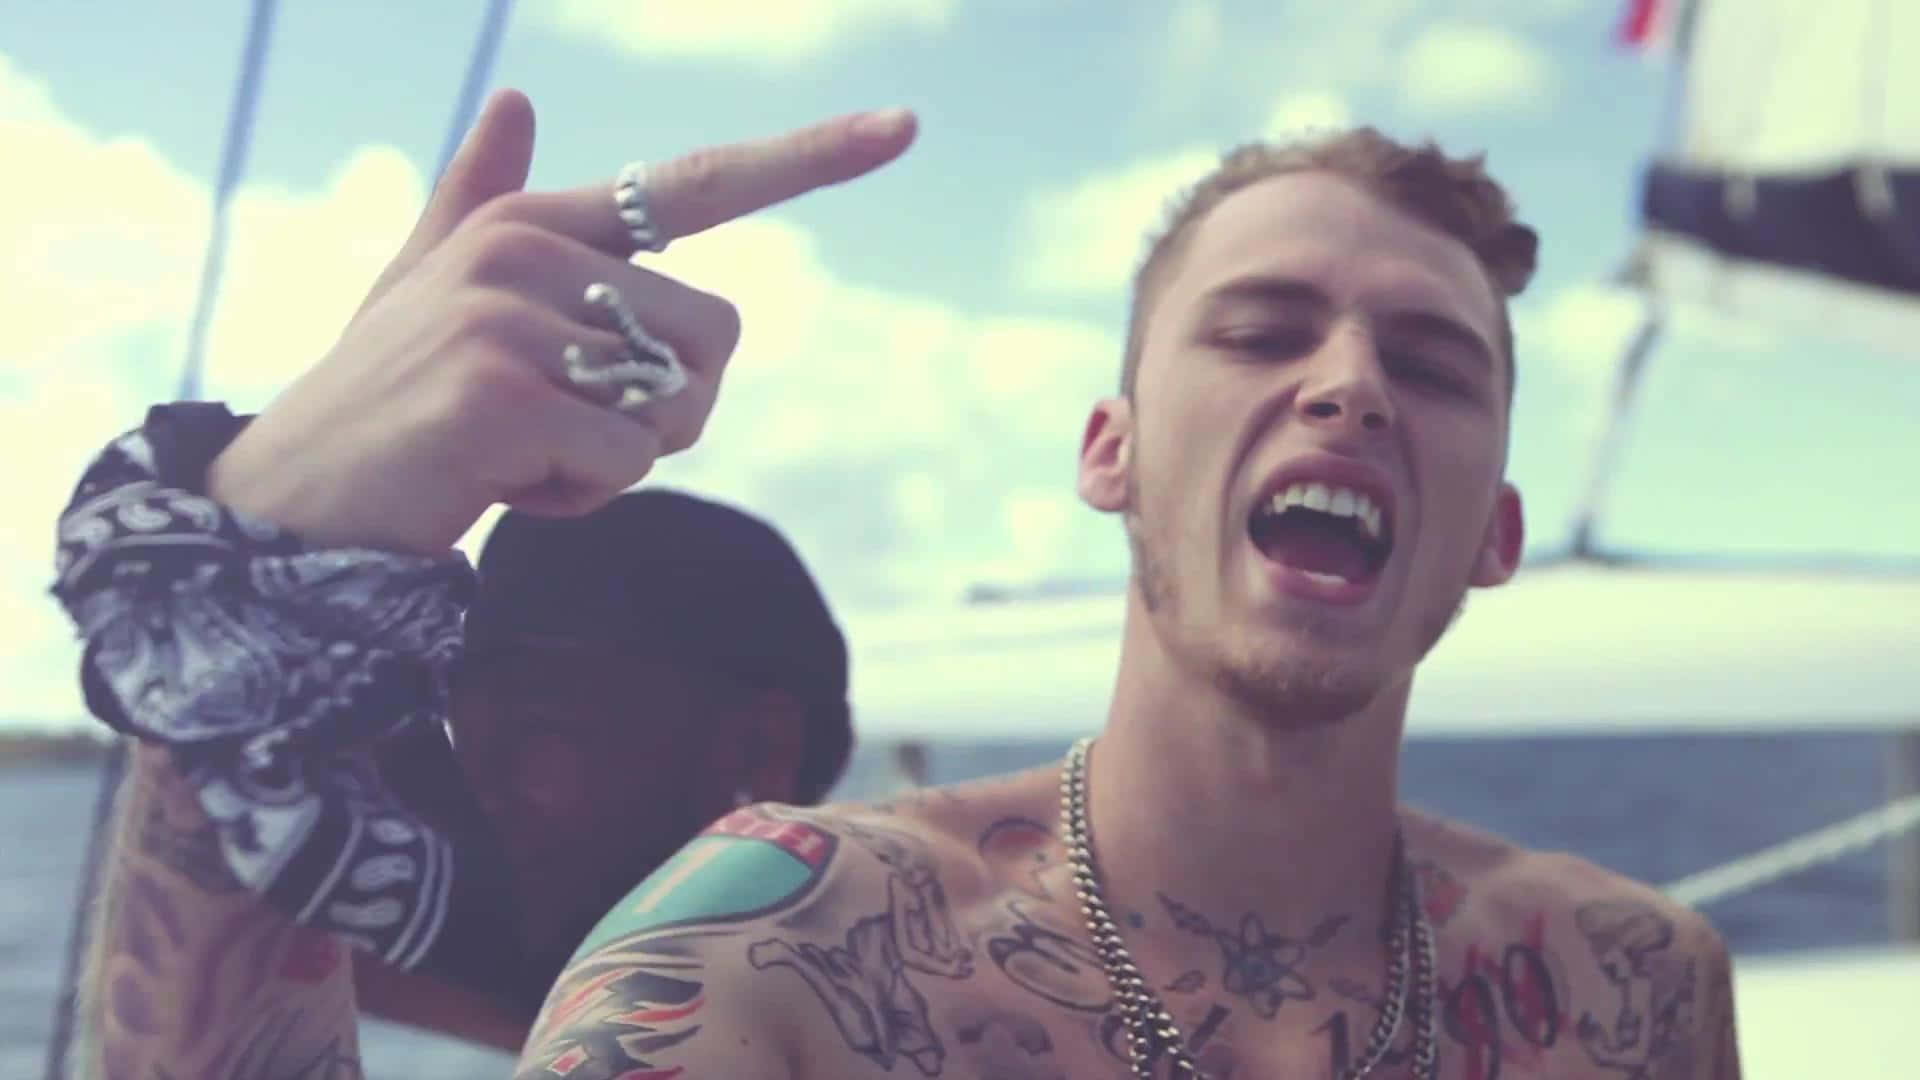 Multi Talented Artist Mgk Performing For An Adoring Crowd